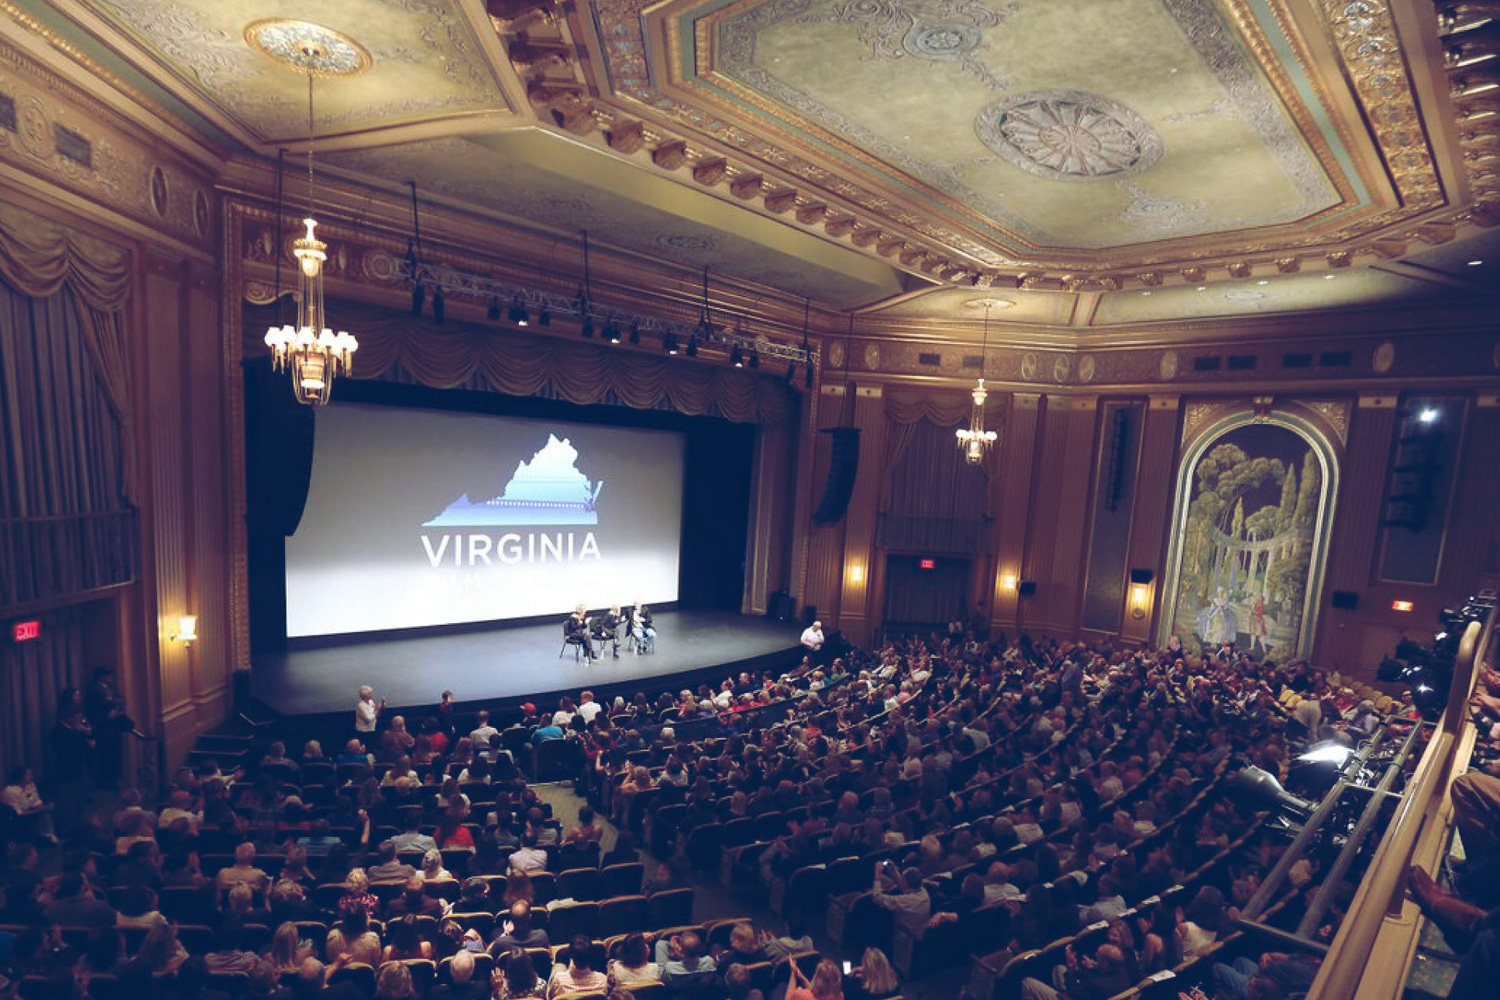 People on stage during the Virginia Film festival talking to audience